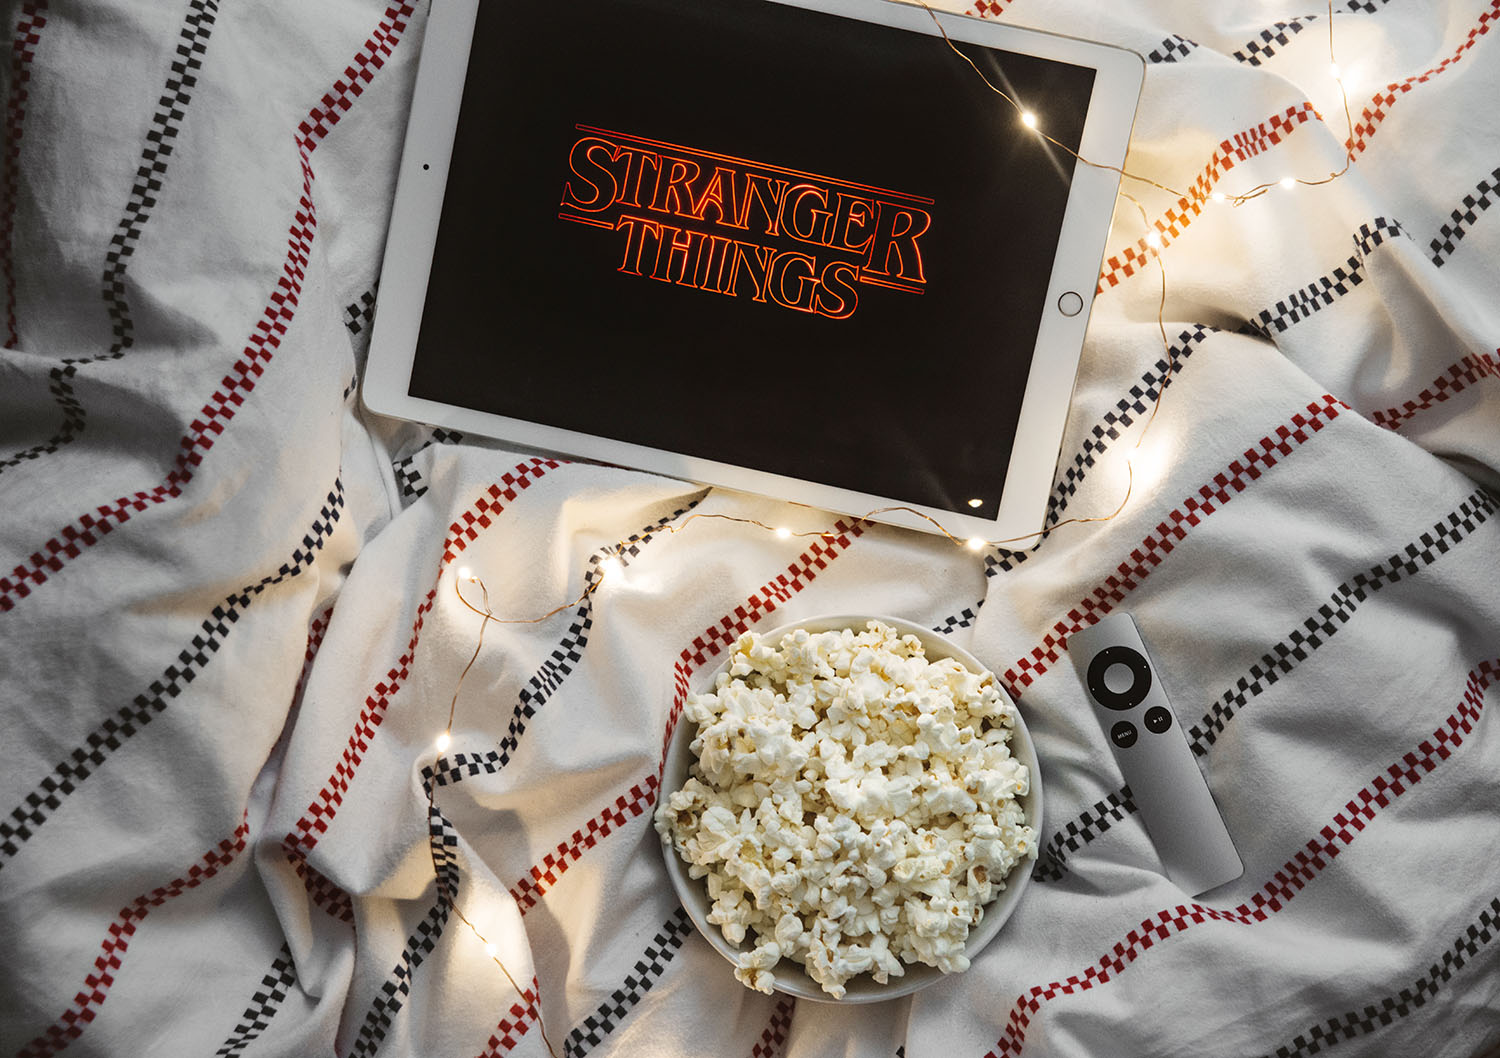 Bästa tv-serierna 2016 / iPad Pro with Stranger Things on Netflix in bed with popcorn